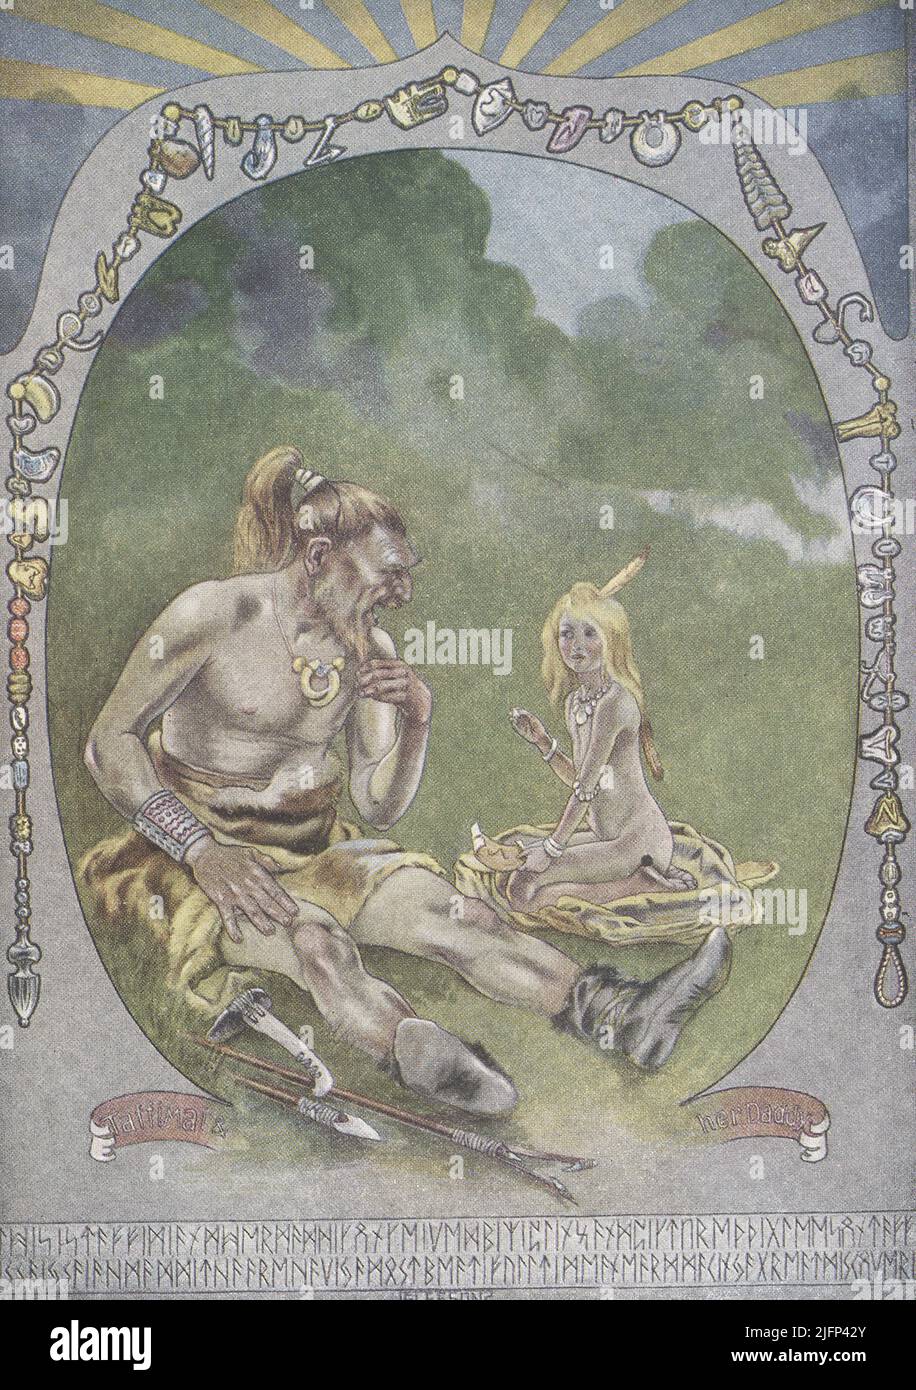 This 1912 image by J M Gleeson illustrates Kipling’s How the alphabet was made. Neolithic man Tegumai Bopsulai is out fishing with his daughter Taffy. They talk about the episode in “How the First Letter was written”, when Taffy’s attempt to send a message in a drawing led to complete misunderstanding. Taffy suggests a way of representing the sounds of the Tegumai language in pictograms. Together she and her father evolve a system using familiar objects and facial expressions, which when simplified become letters of the alphabet. The system was adopted and improved for thousands of years and n Stock Photo